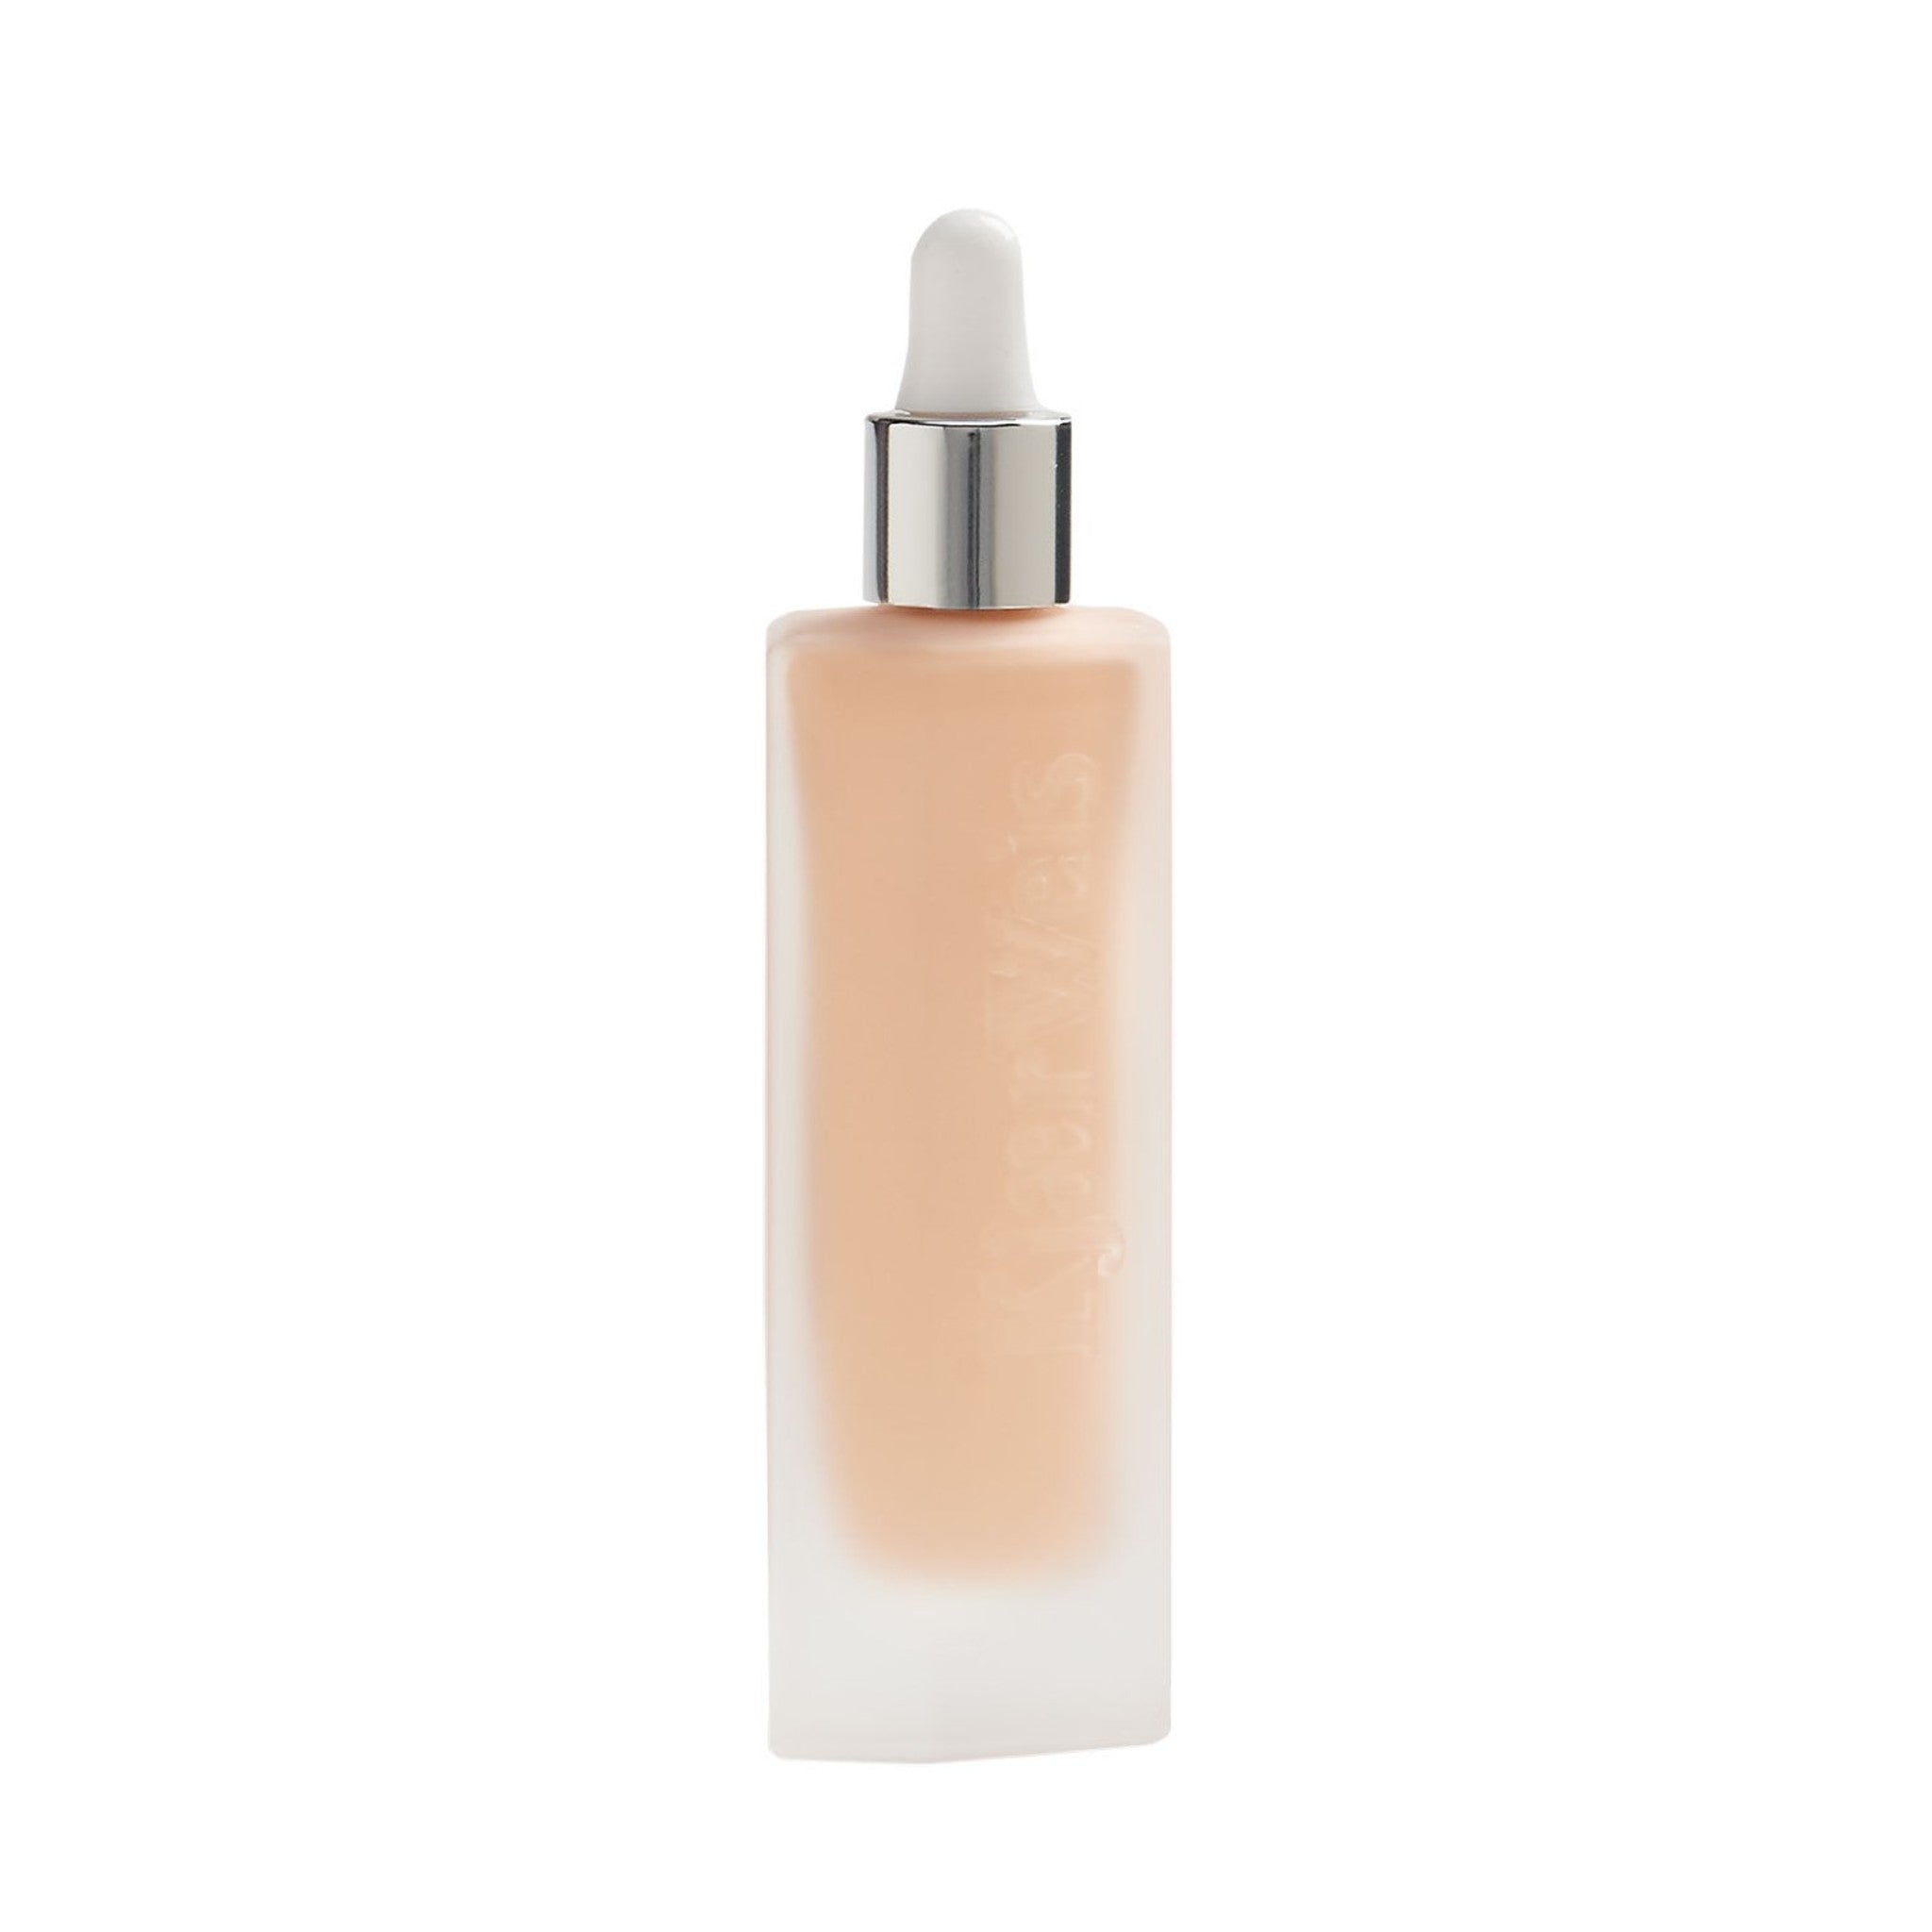 Kjaer Weis Invisible Touch Liquid Foundation Color/Shade variant: Whisper F110 main image. This product is for light complexions